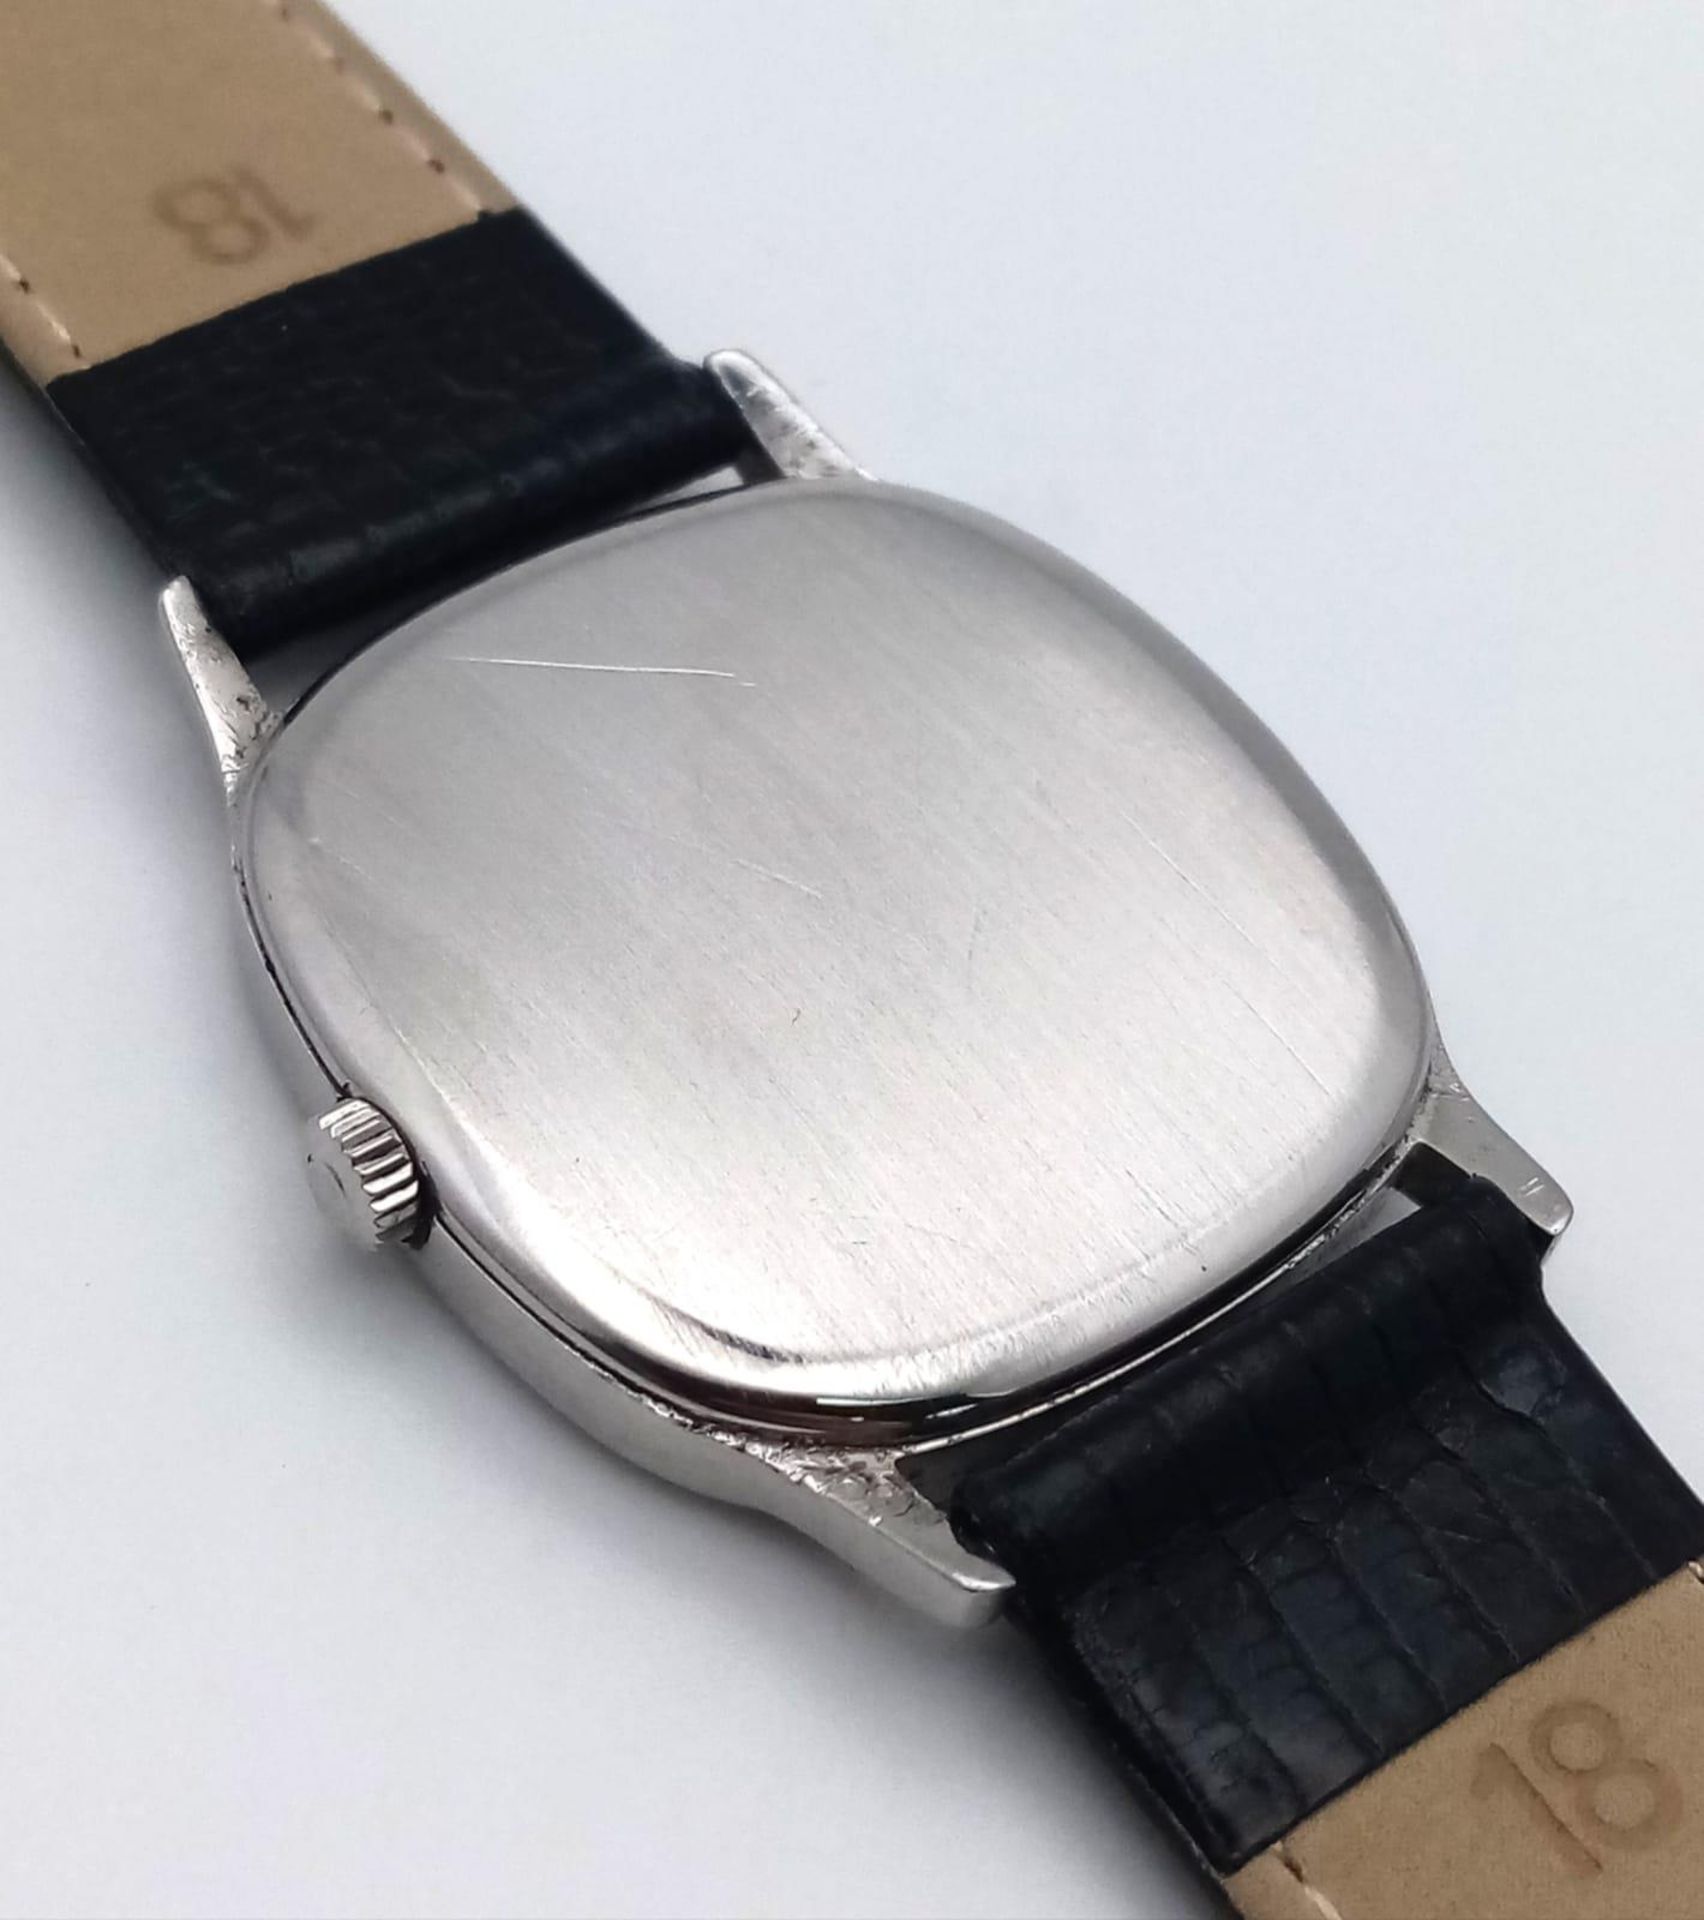 AN OMEGA DE VILLE IN STAINLESS STEEL WITH MANUAL WINDING MOVEMENT AND ON A BLACK LEATHER STRAP . - Image 6 of 6